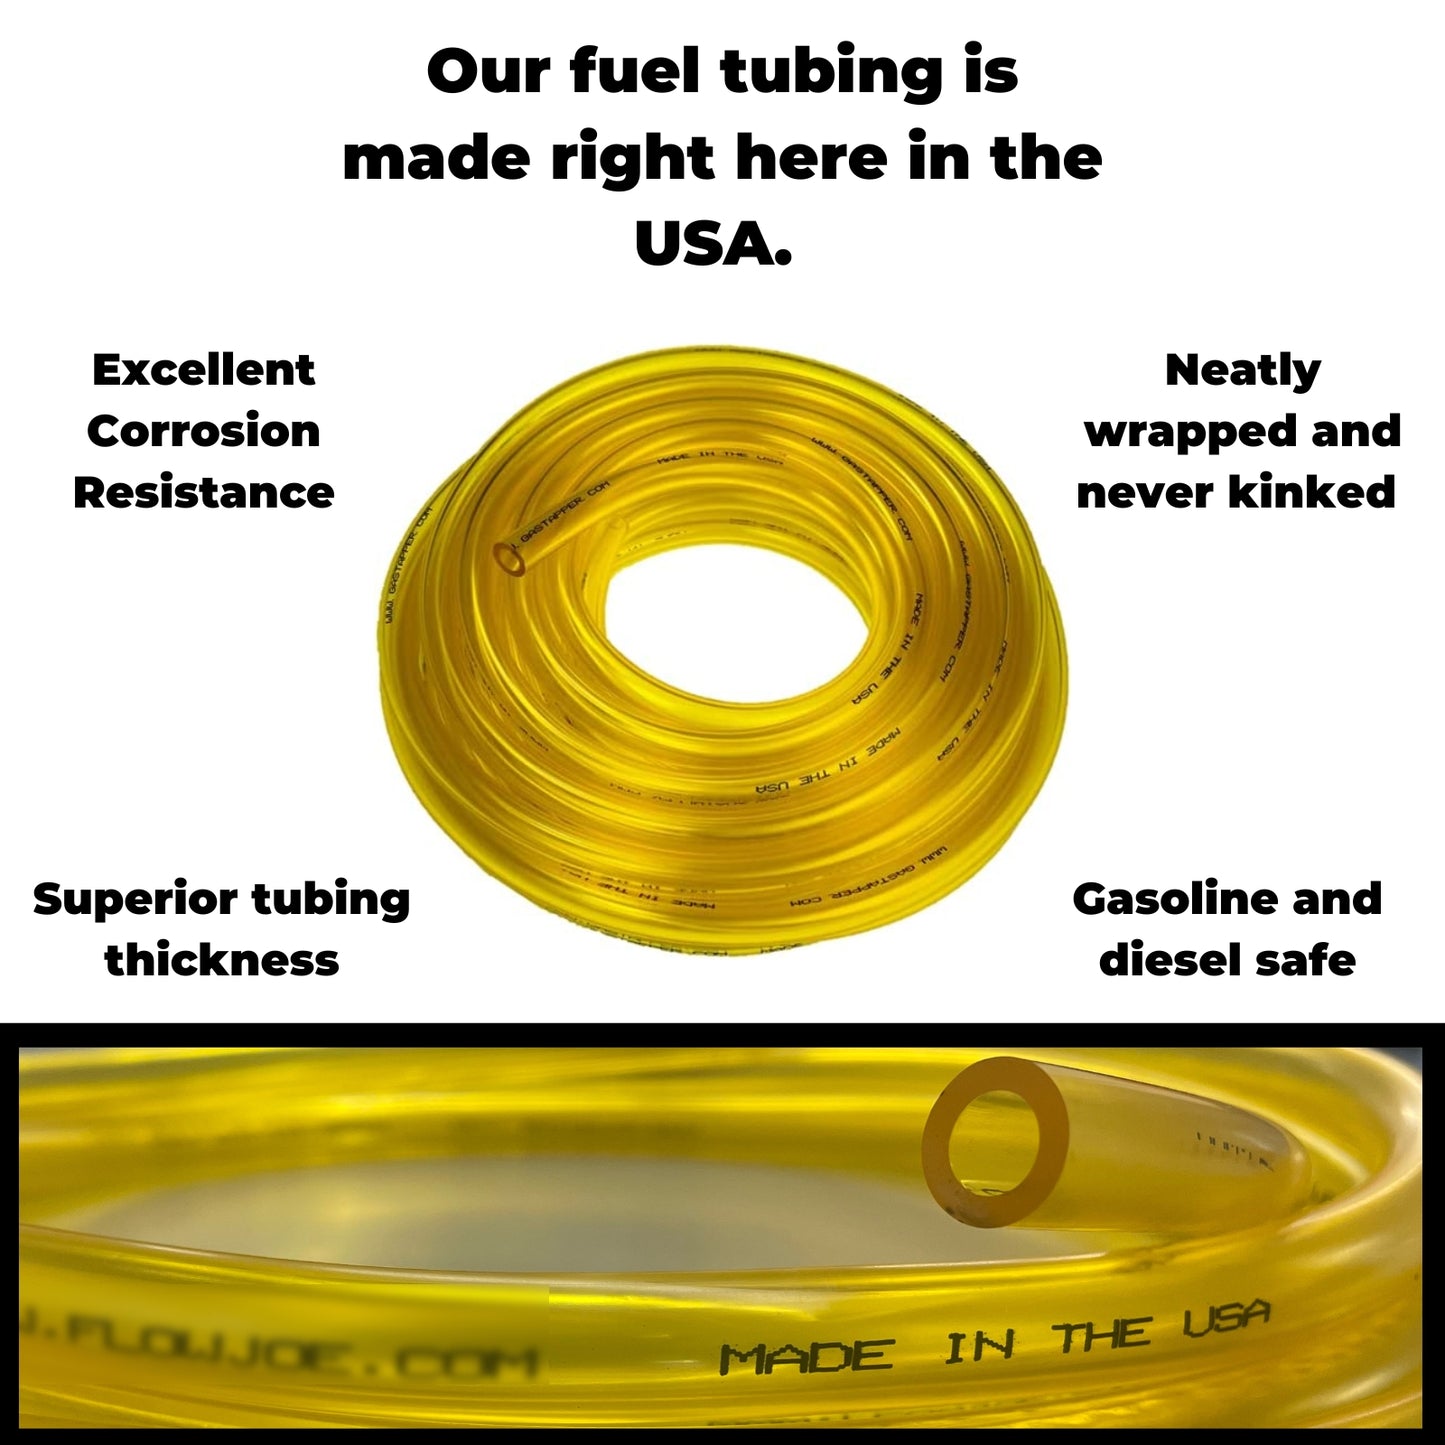 GasTapper Standard uses tubing made specifically for use with fuel right here in the USA